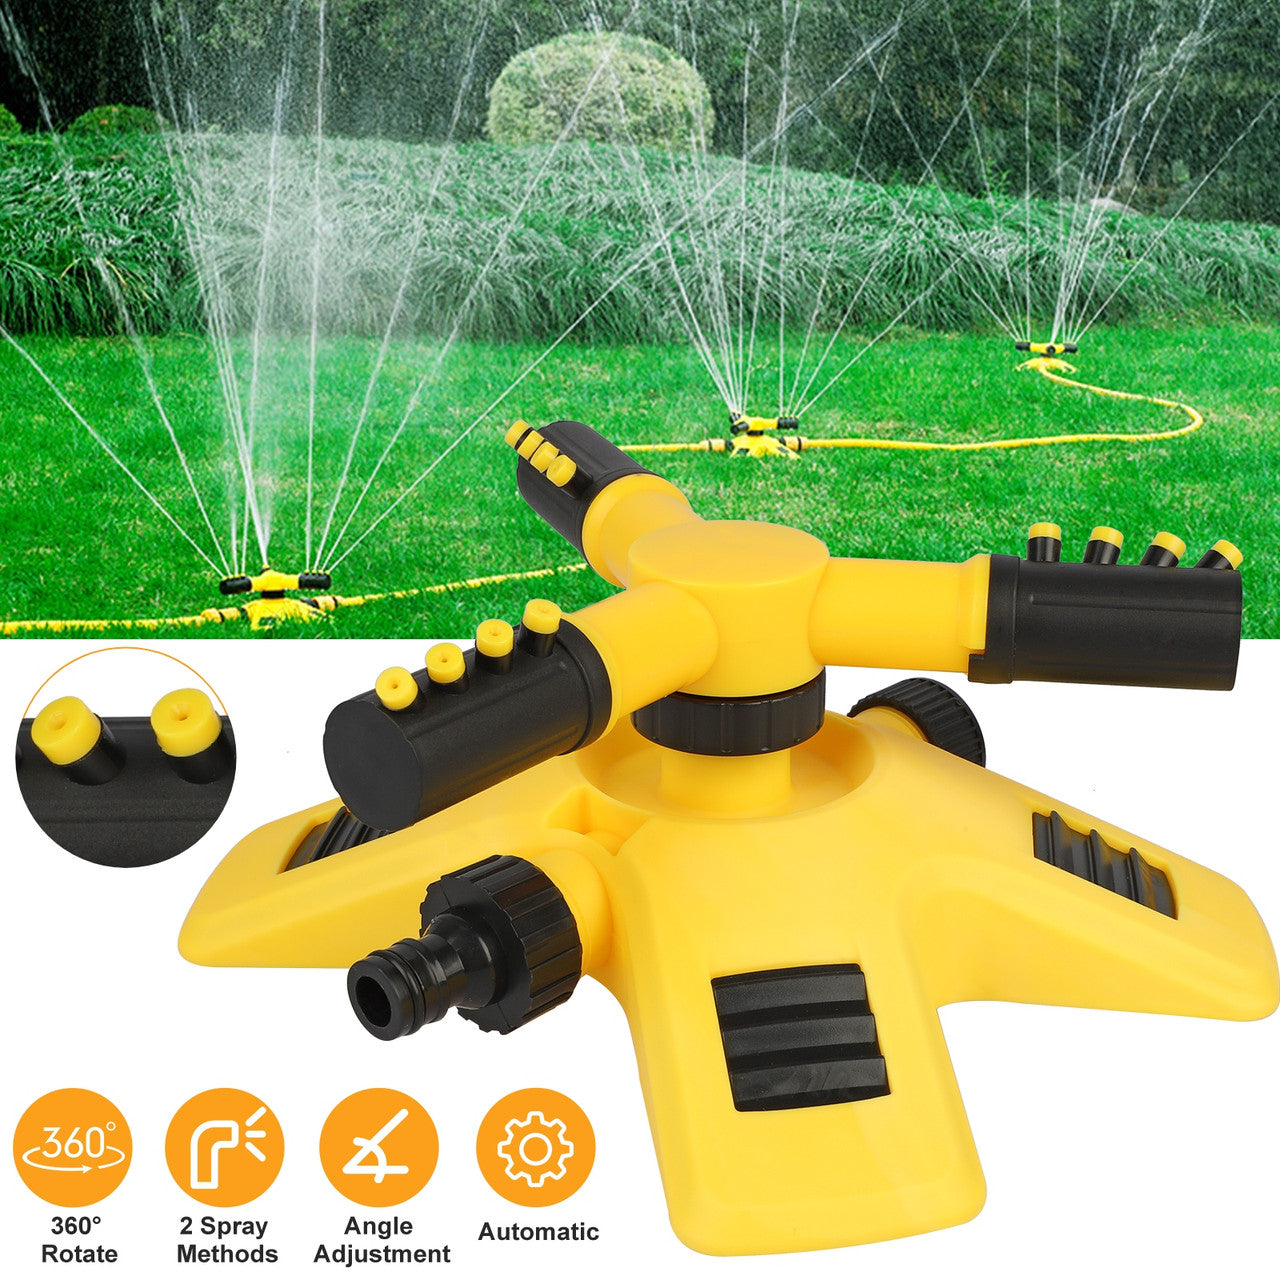 360° Auto Rotating Lawn Sprinklers with a Two-Spray Method and can be eaasily and quickly Installed